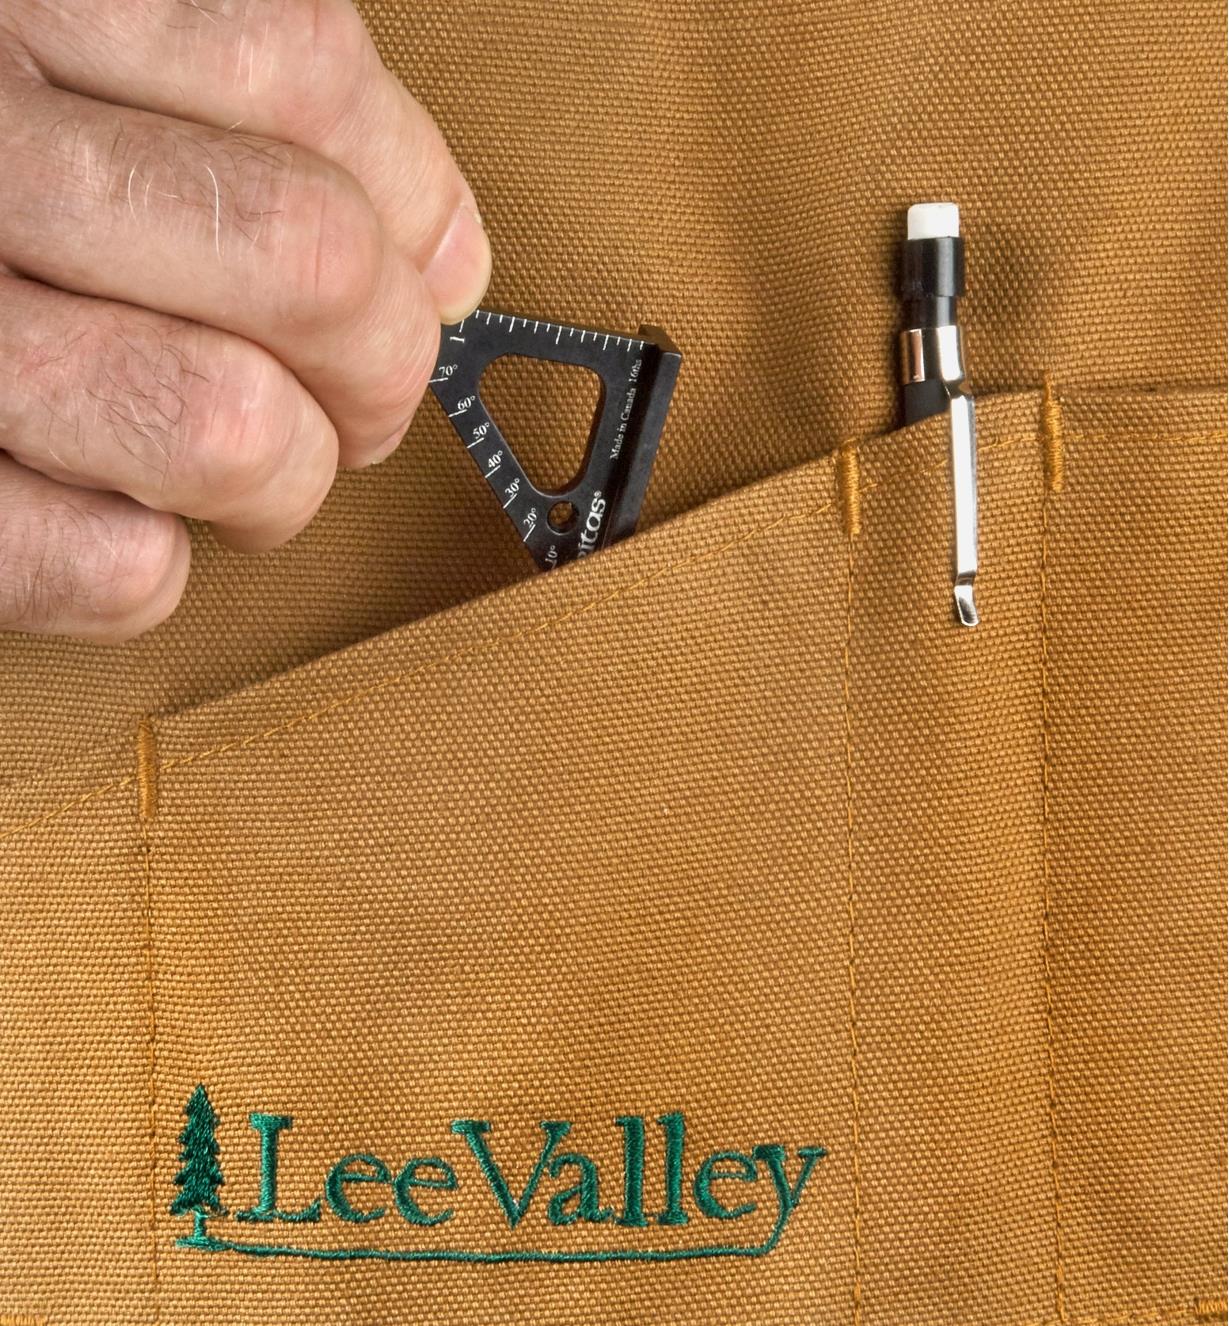 A woodworker slips a Veritas 1 1/2"" Pocket Layout Square into the pocket of a workshop apron